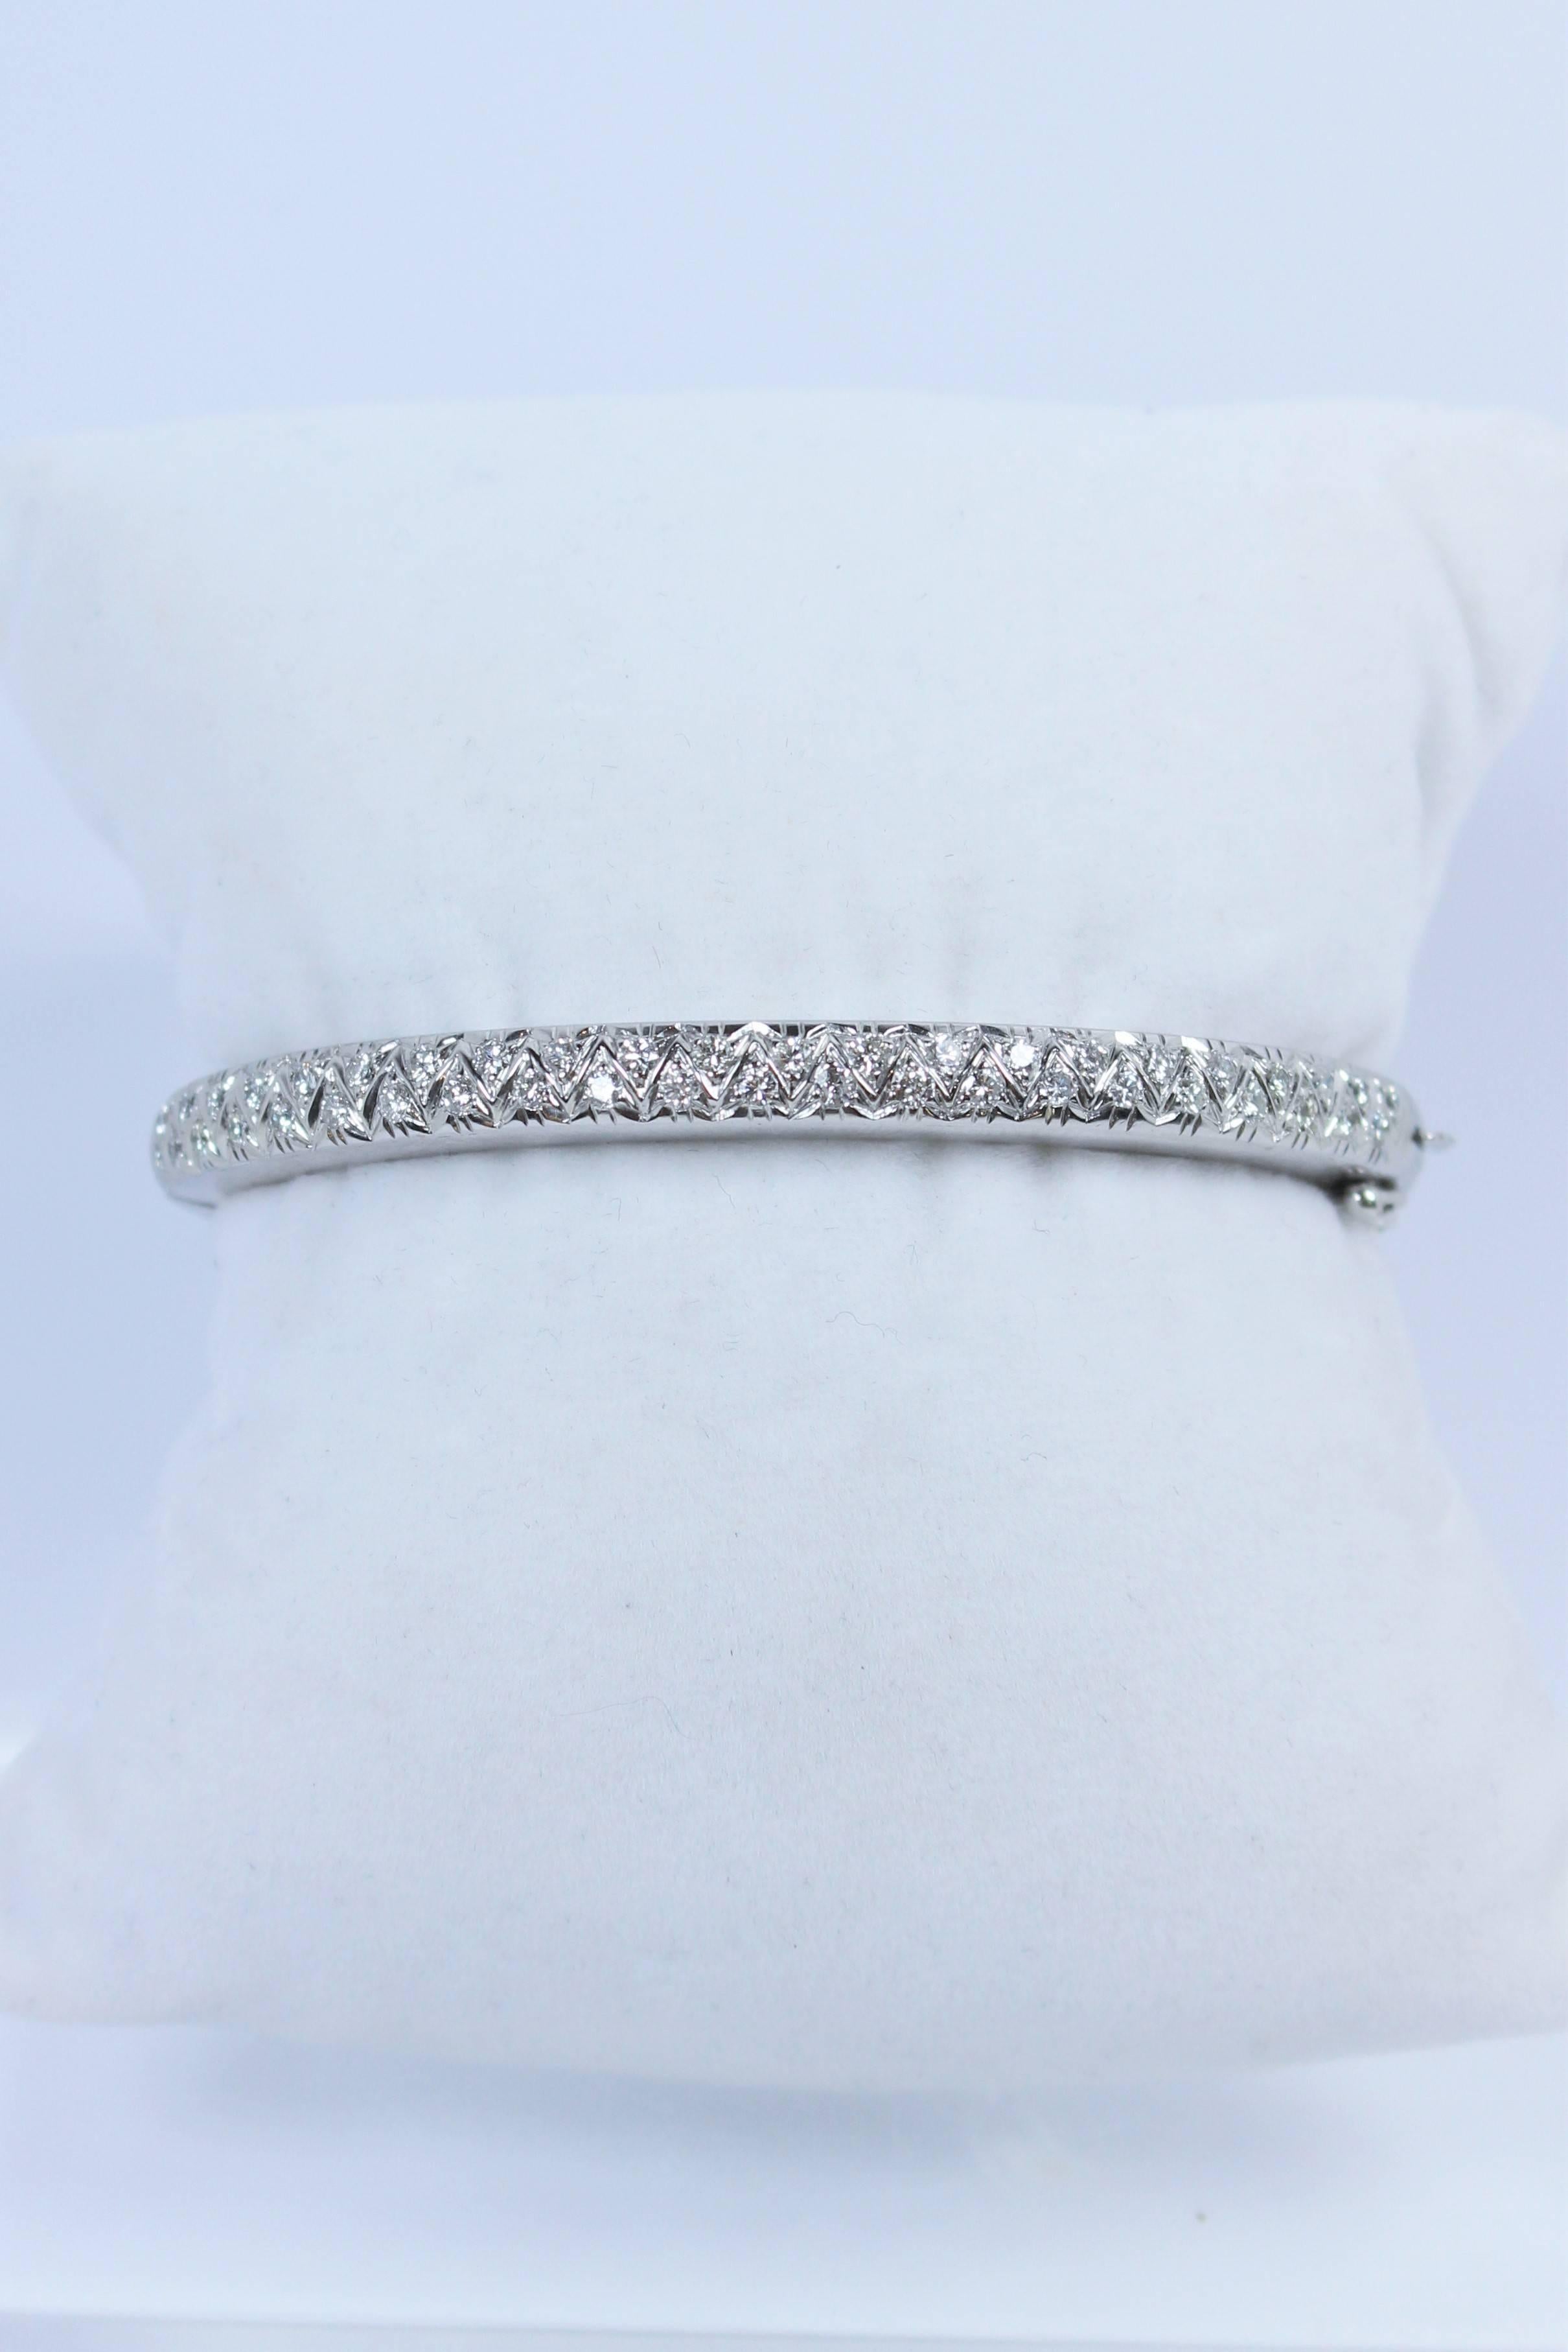 This bracelet is composed of 14kt white gold with pave diamonds. Features a hinge closure. In excellent vintage condition.

Specs: 
14KT White Gold
Pave Diamonds Approximately 44 with 1.25 Carats
 
Length: 6 7/16